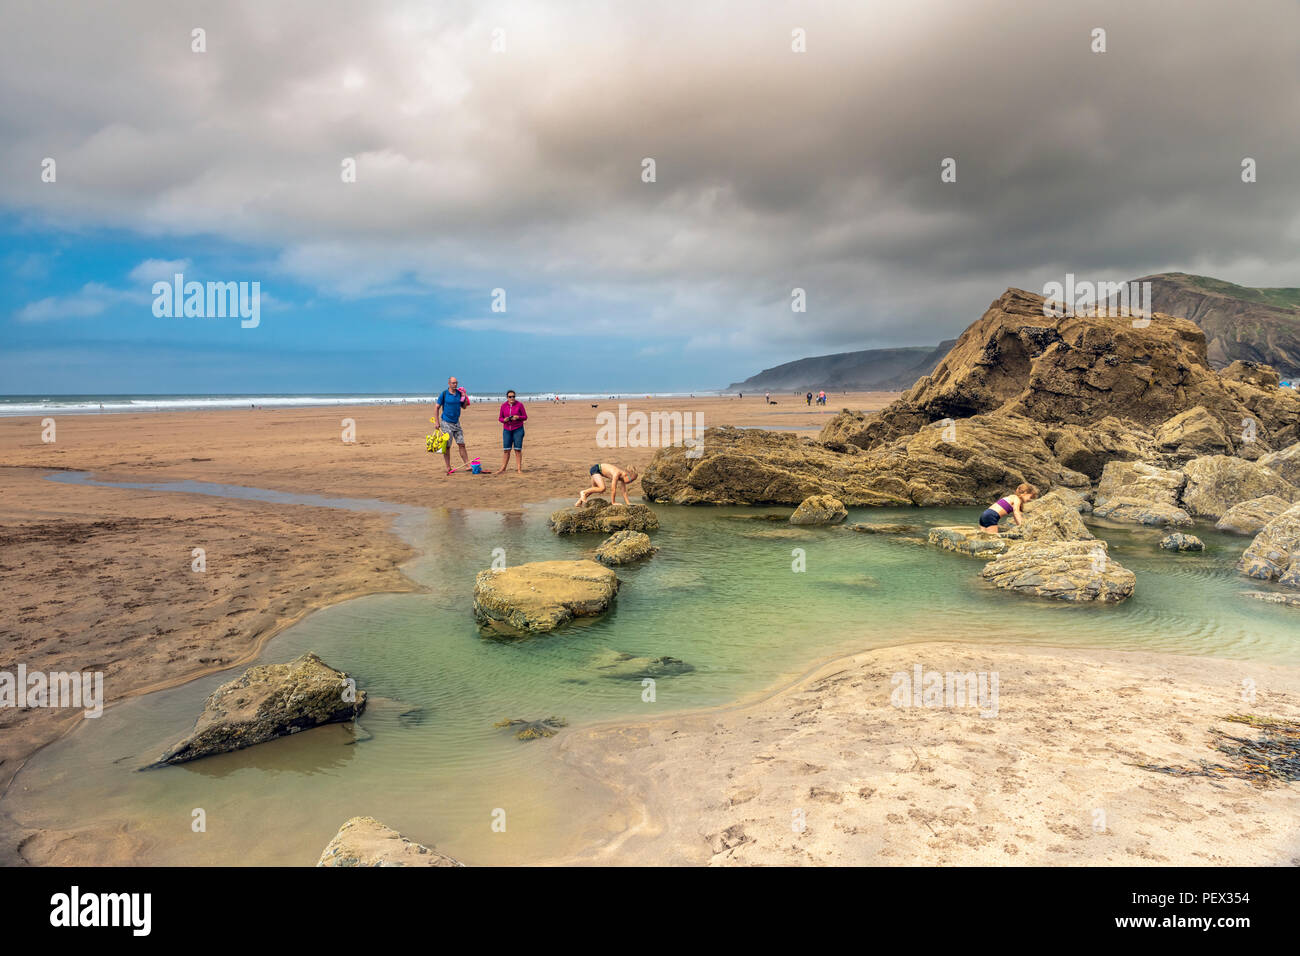 UK  Weather - The beautiful beach at Sandymouth proves popular with holidaymakers as the sun finally puts in an appearance as the low mist and cloud c Stock Photo